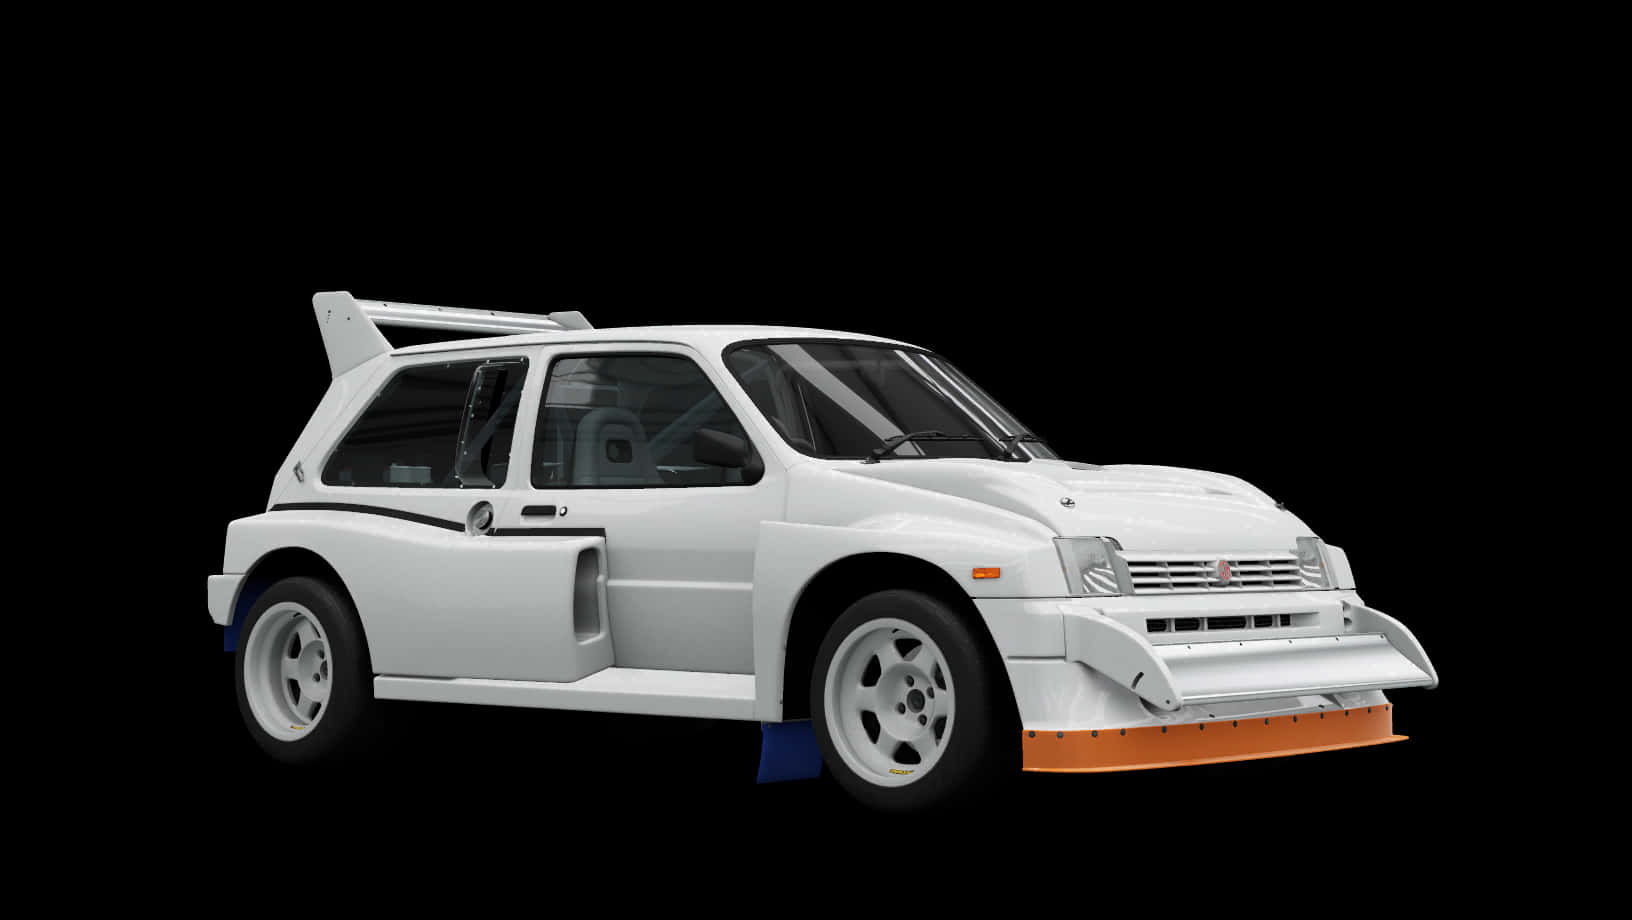 Imperial British Engineering With Mg Metro 6r4 Rally Car Wallpaper